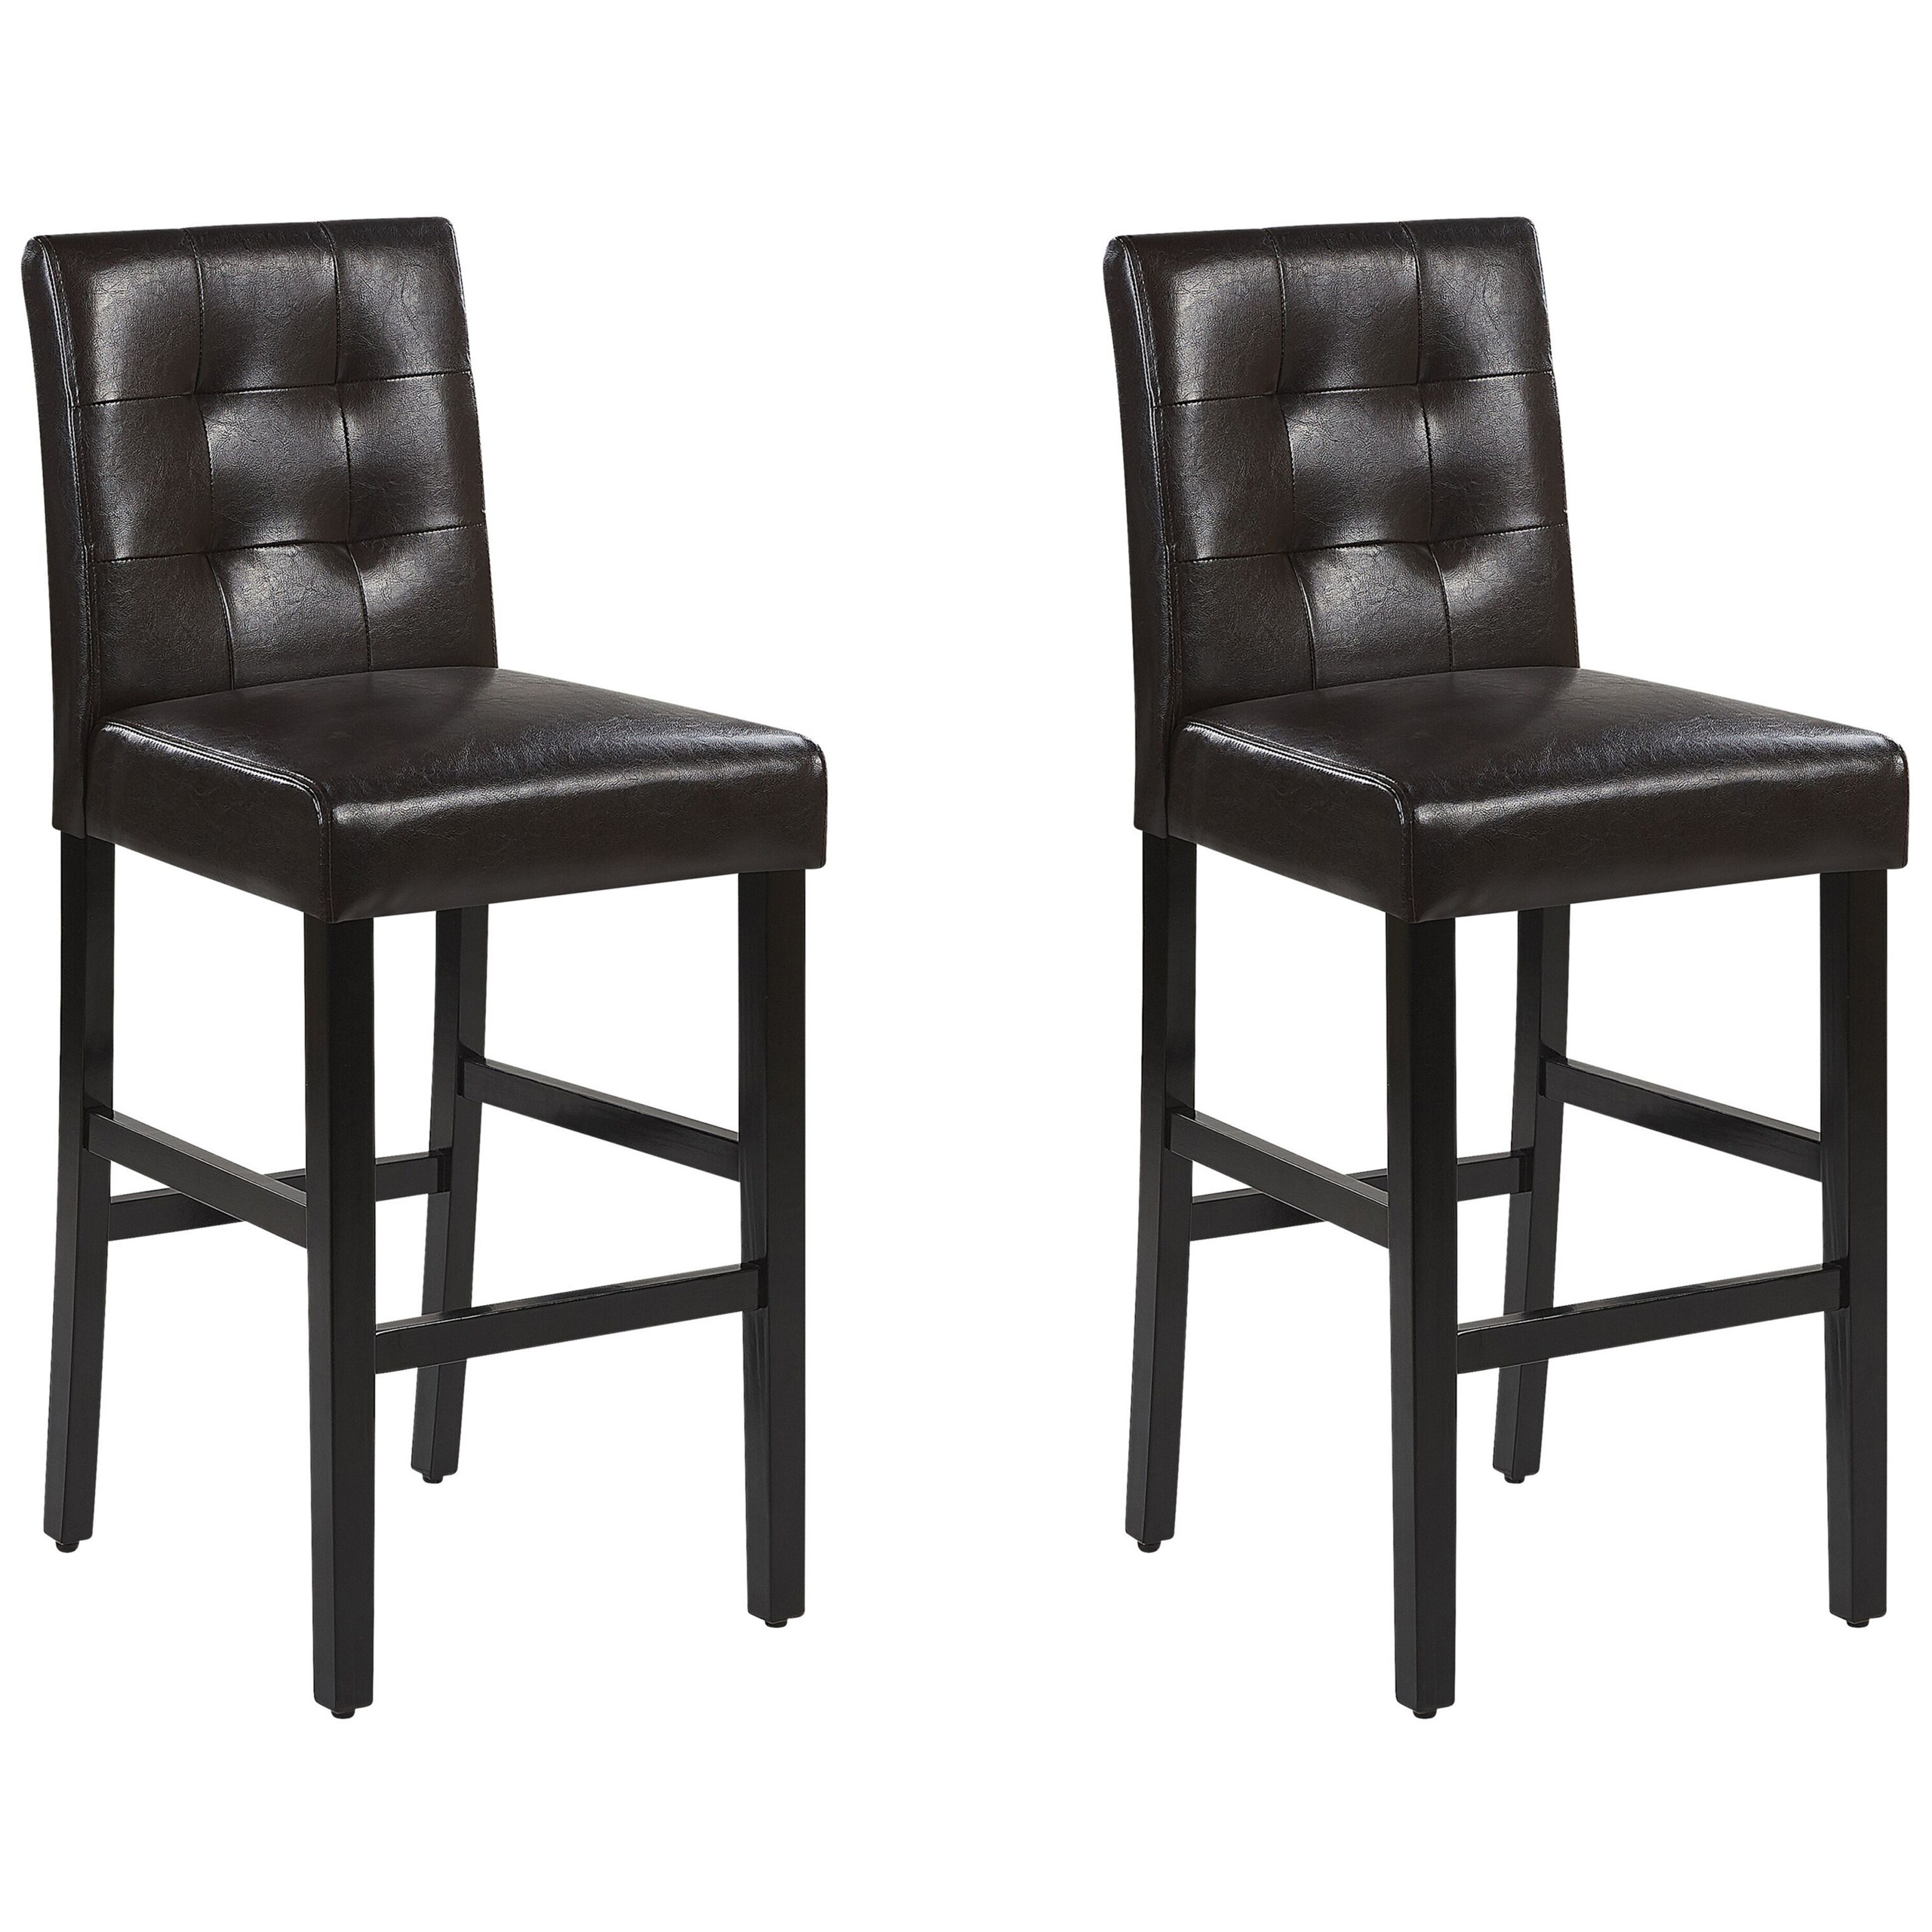 Beliani Set of 2 Bar Stools Brown Faux Leather Upholstery Light Wood Legs Retro Style